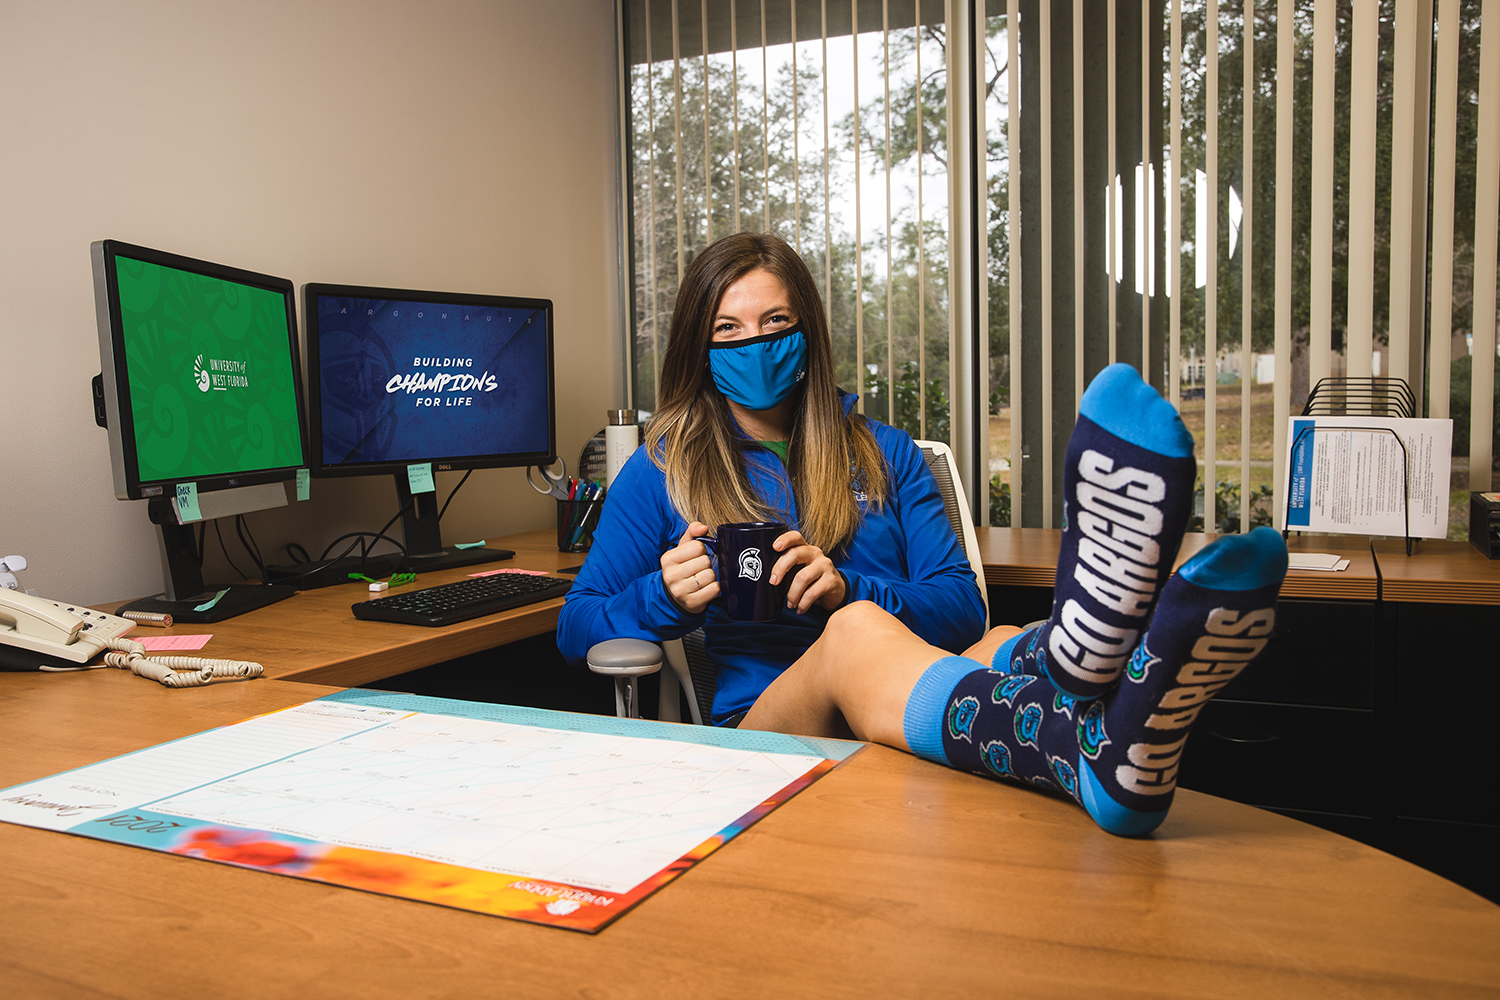 University Advancement promotes Argonaut-branded socks to those who donate gifts on UWF's annual Day of Giving.